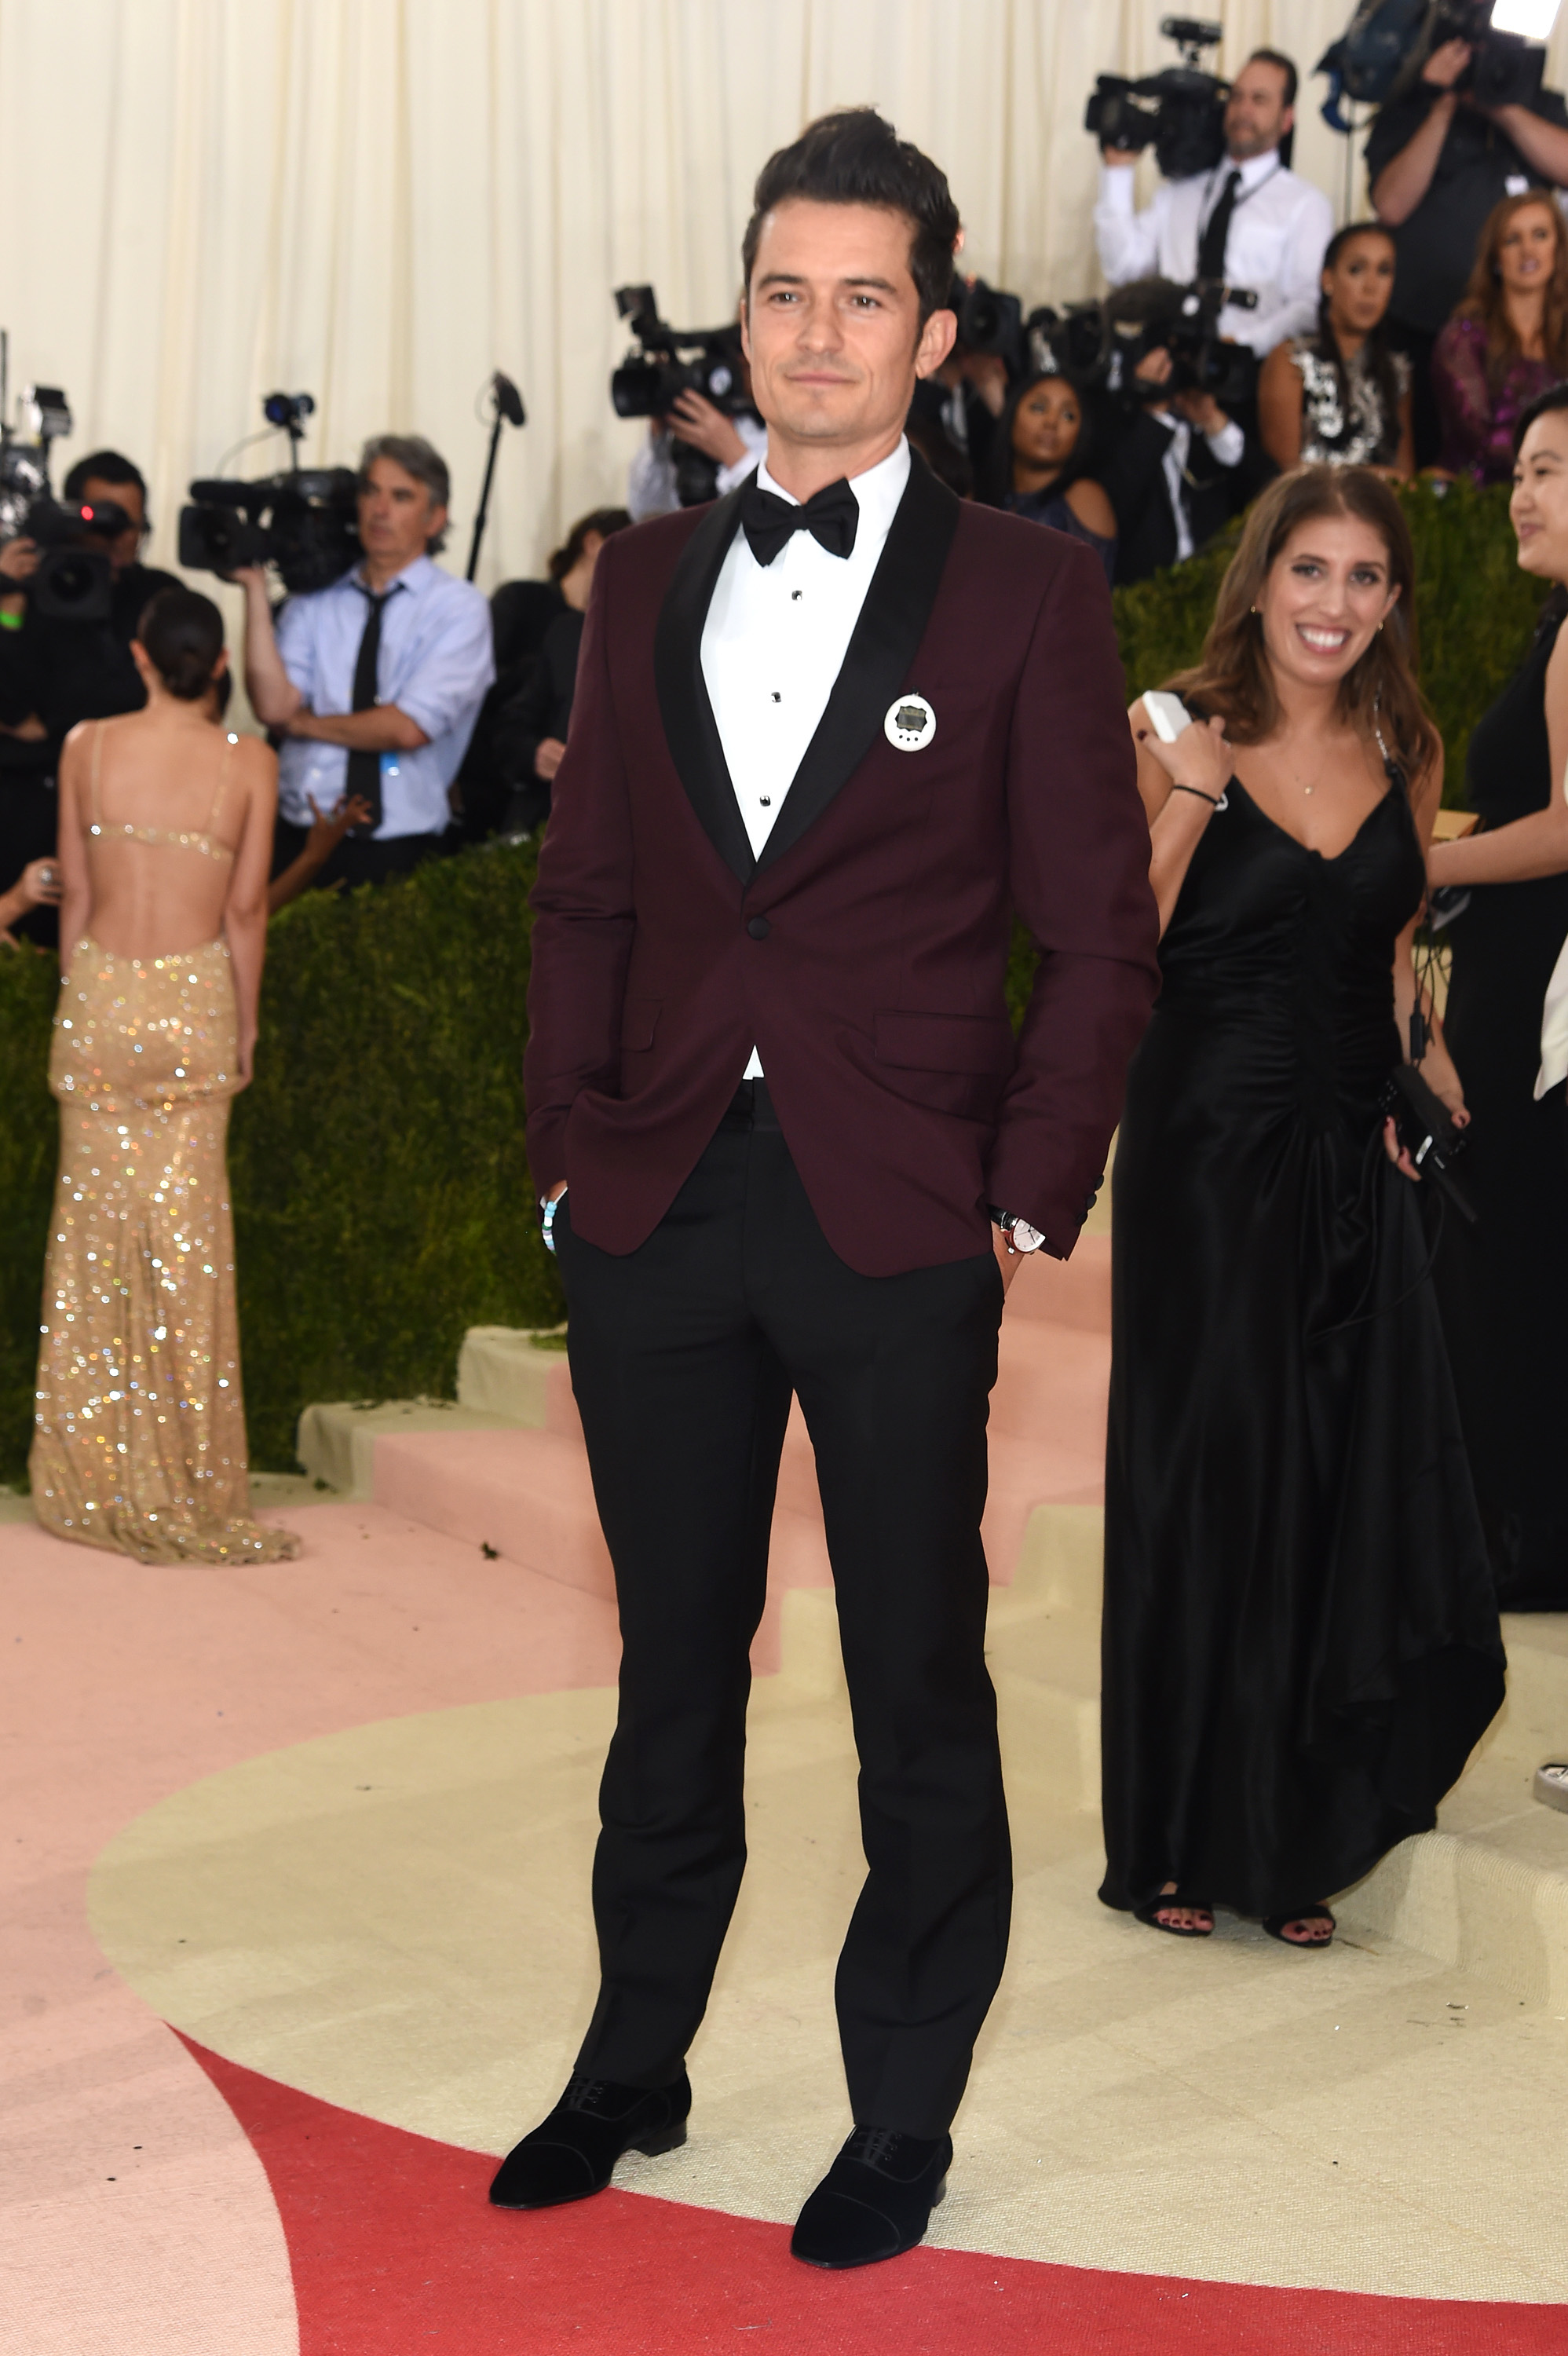 Orlando Bloom attends "Manus x Machina: Fashion In An Age Of Technology" Costume Institute Gala at Metropolitan Museum of Art on May 2, 2016 in New York City.